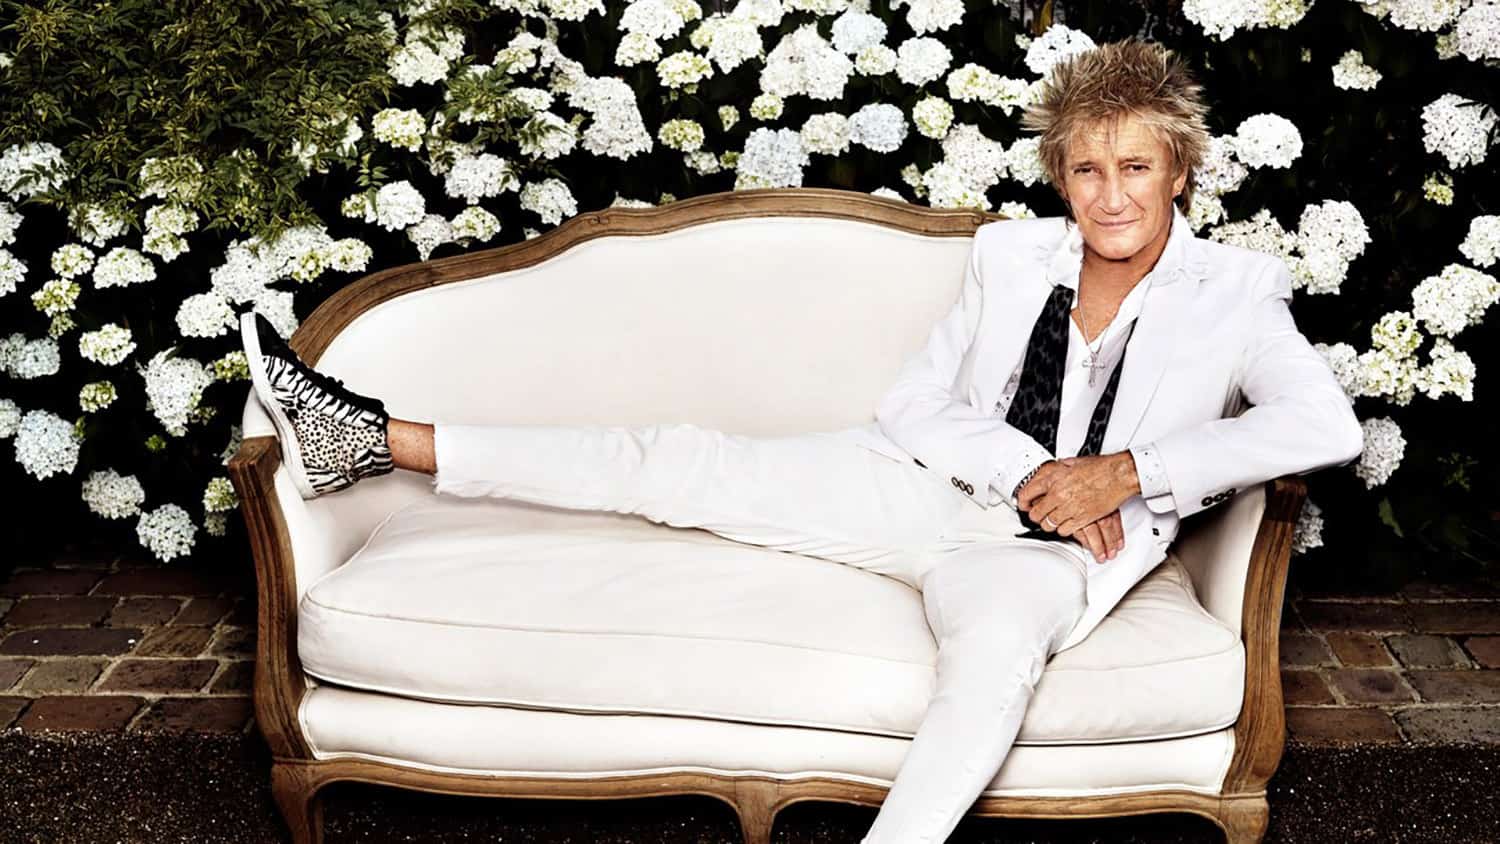 Rod Stewart, 73, Aims for Age-Appropriateness with New Album, 'Blood R...